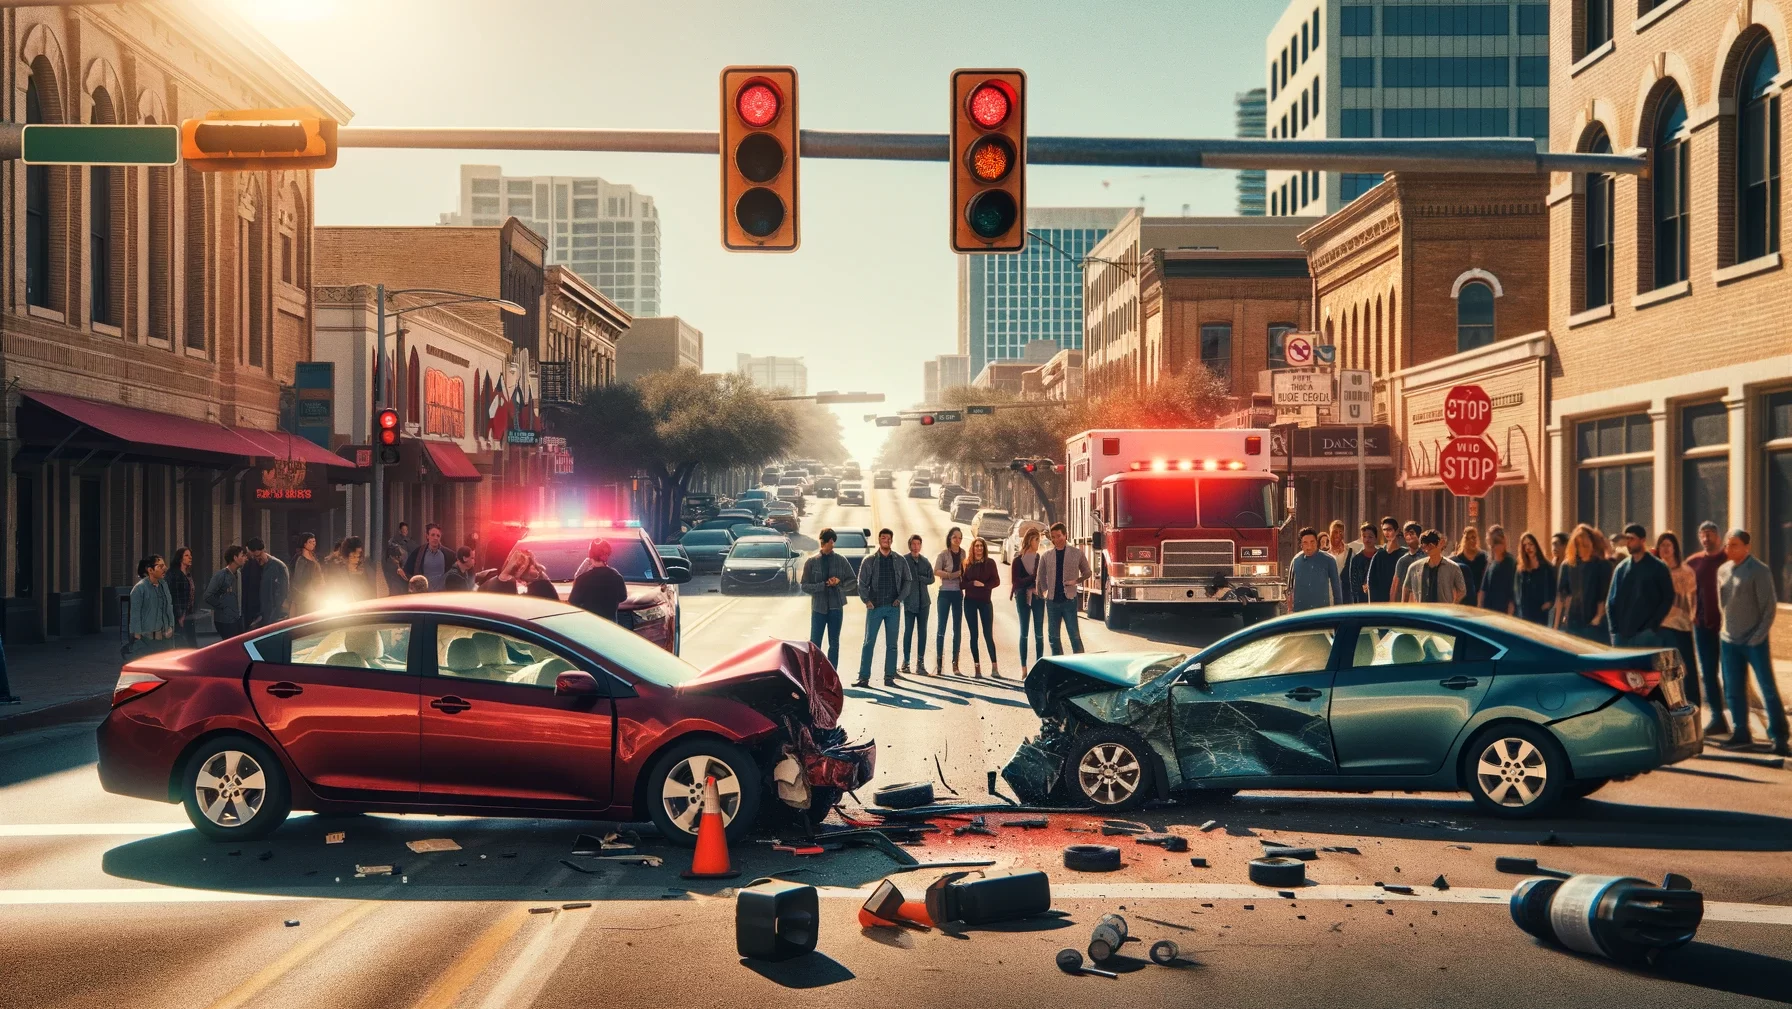 Red light accident at a busy intersection in texas.